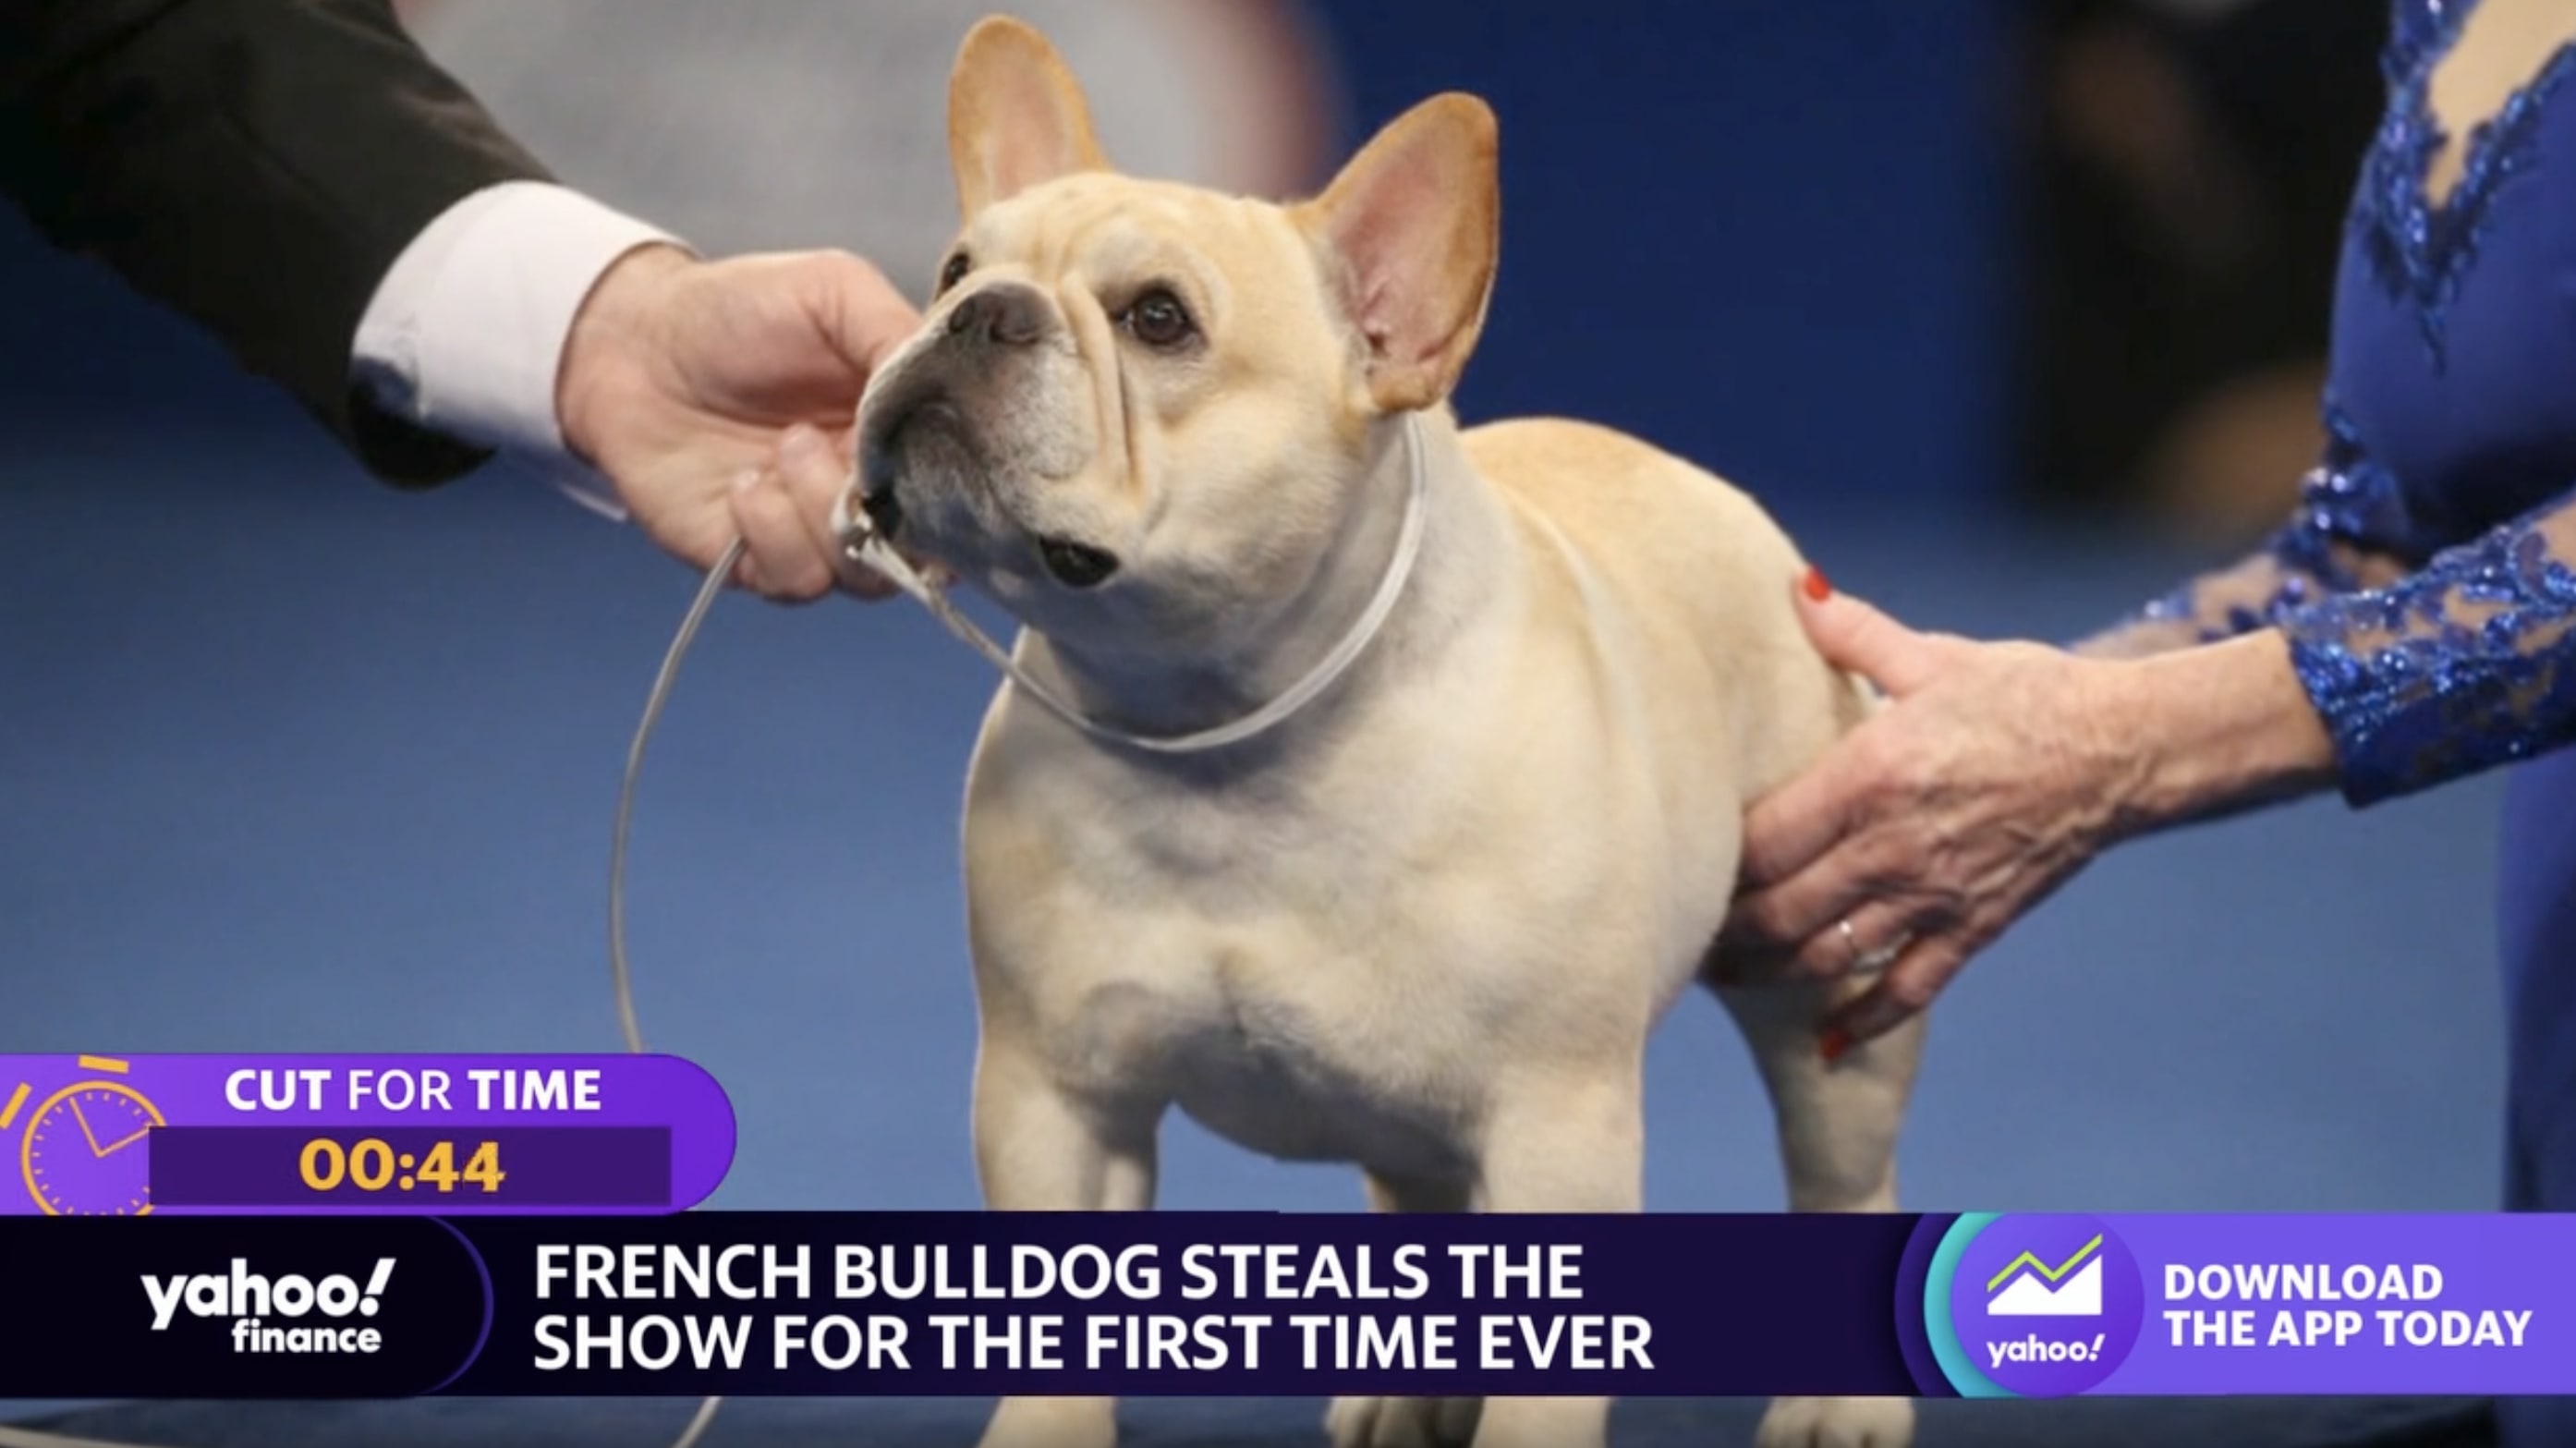 are french bulldogs good first pets